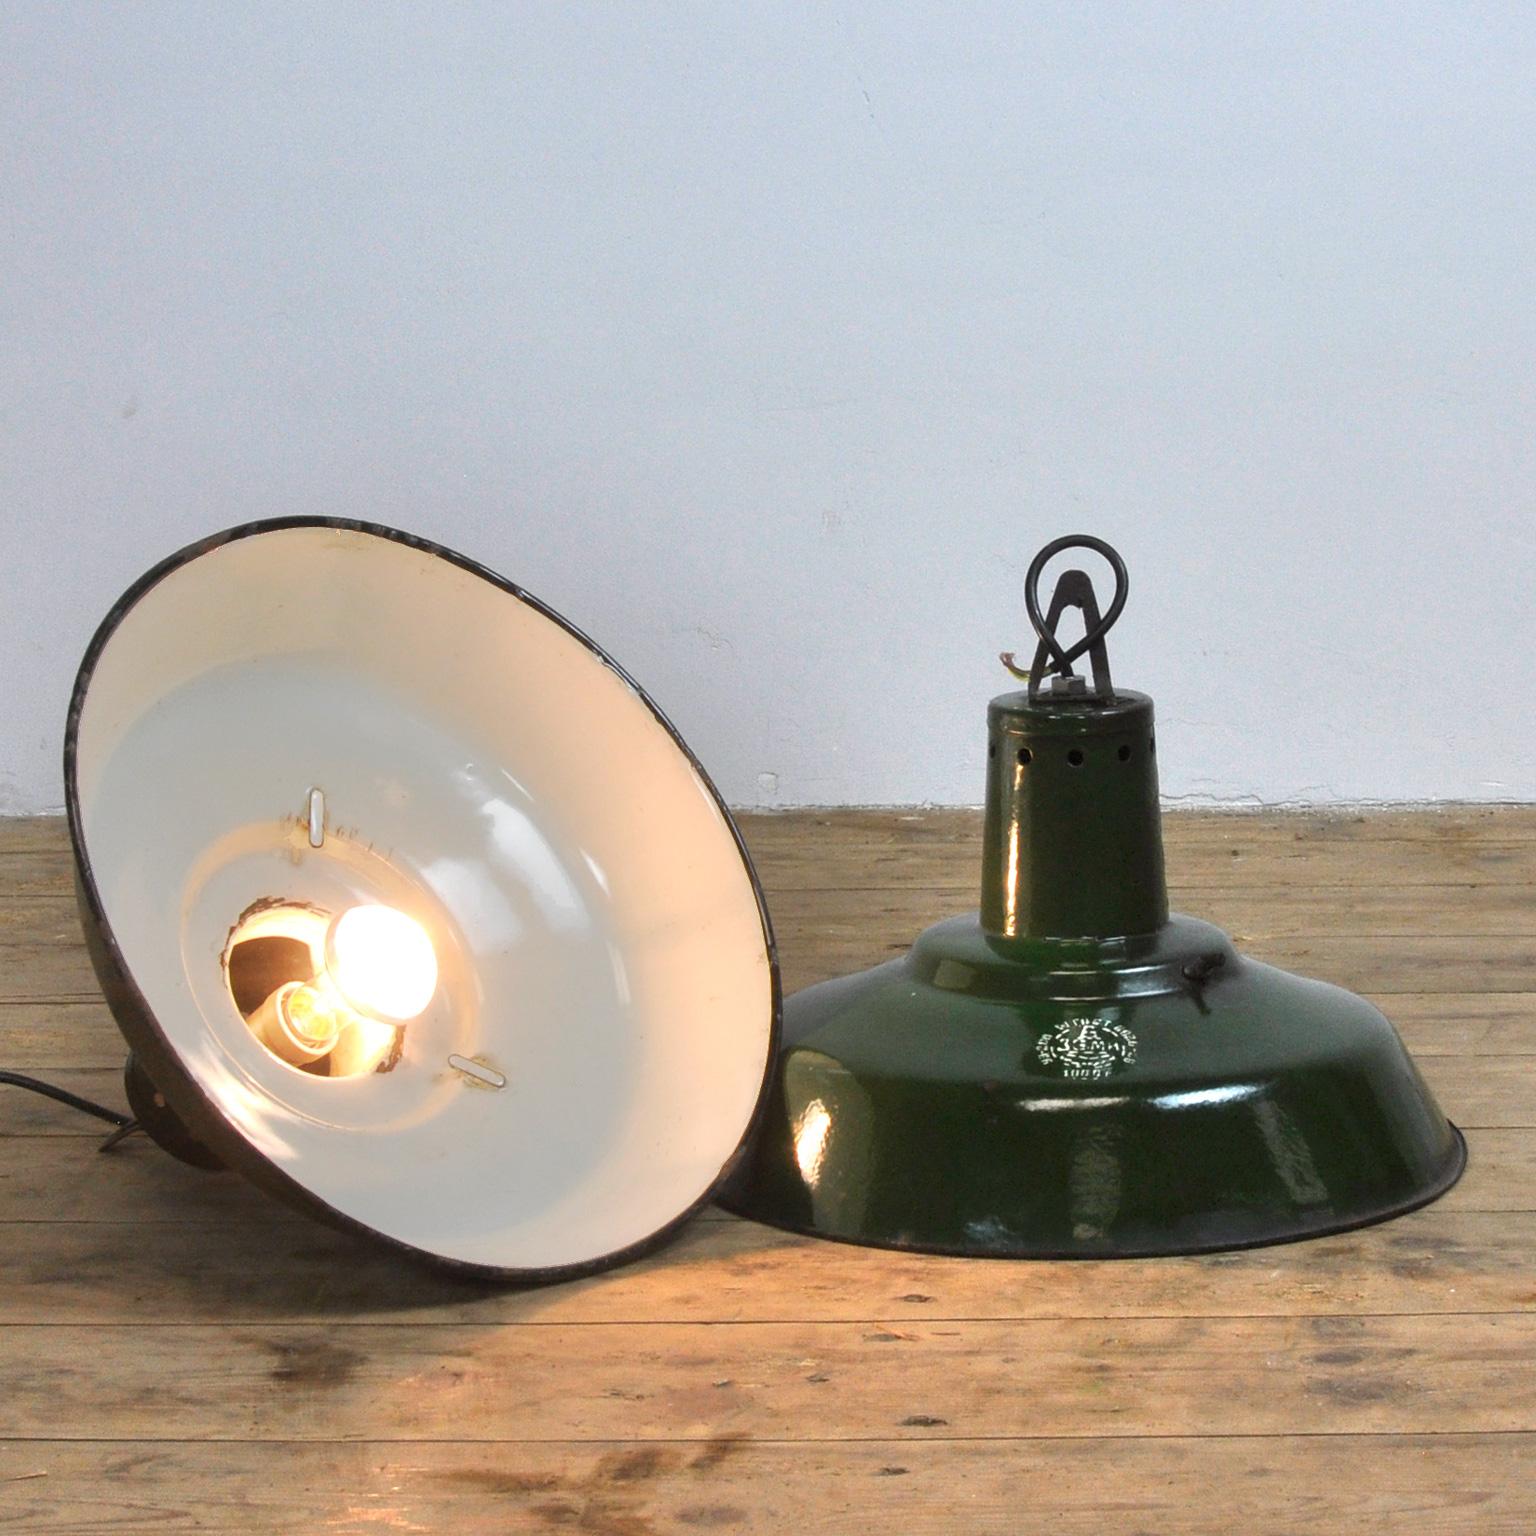 Eastern Bloc industrial pendant lamp. Comes from Hungary.
The lamp is rewired. Green enamel, white interior.
1 piece available. Price is per 1 piece.